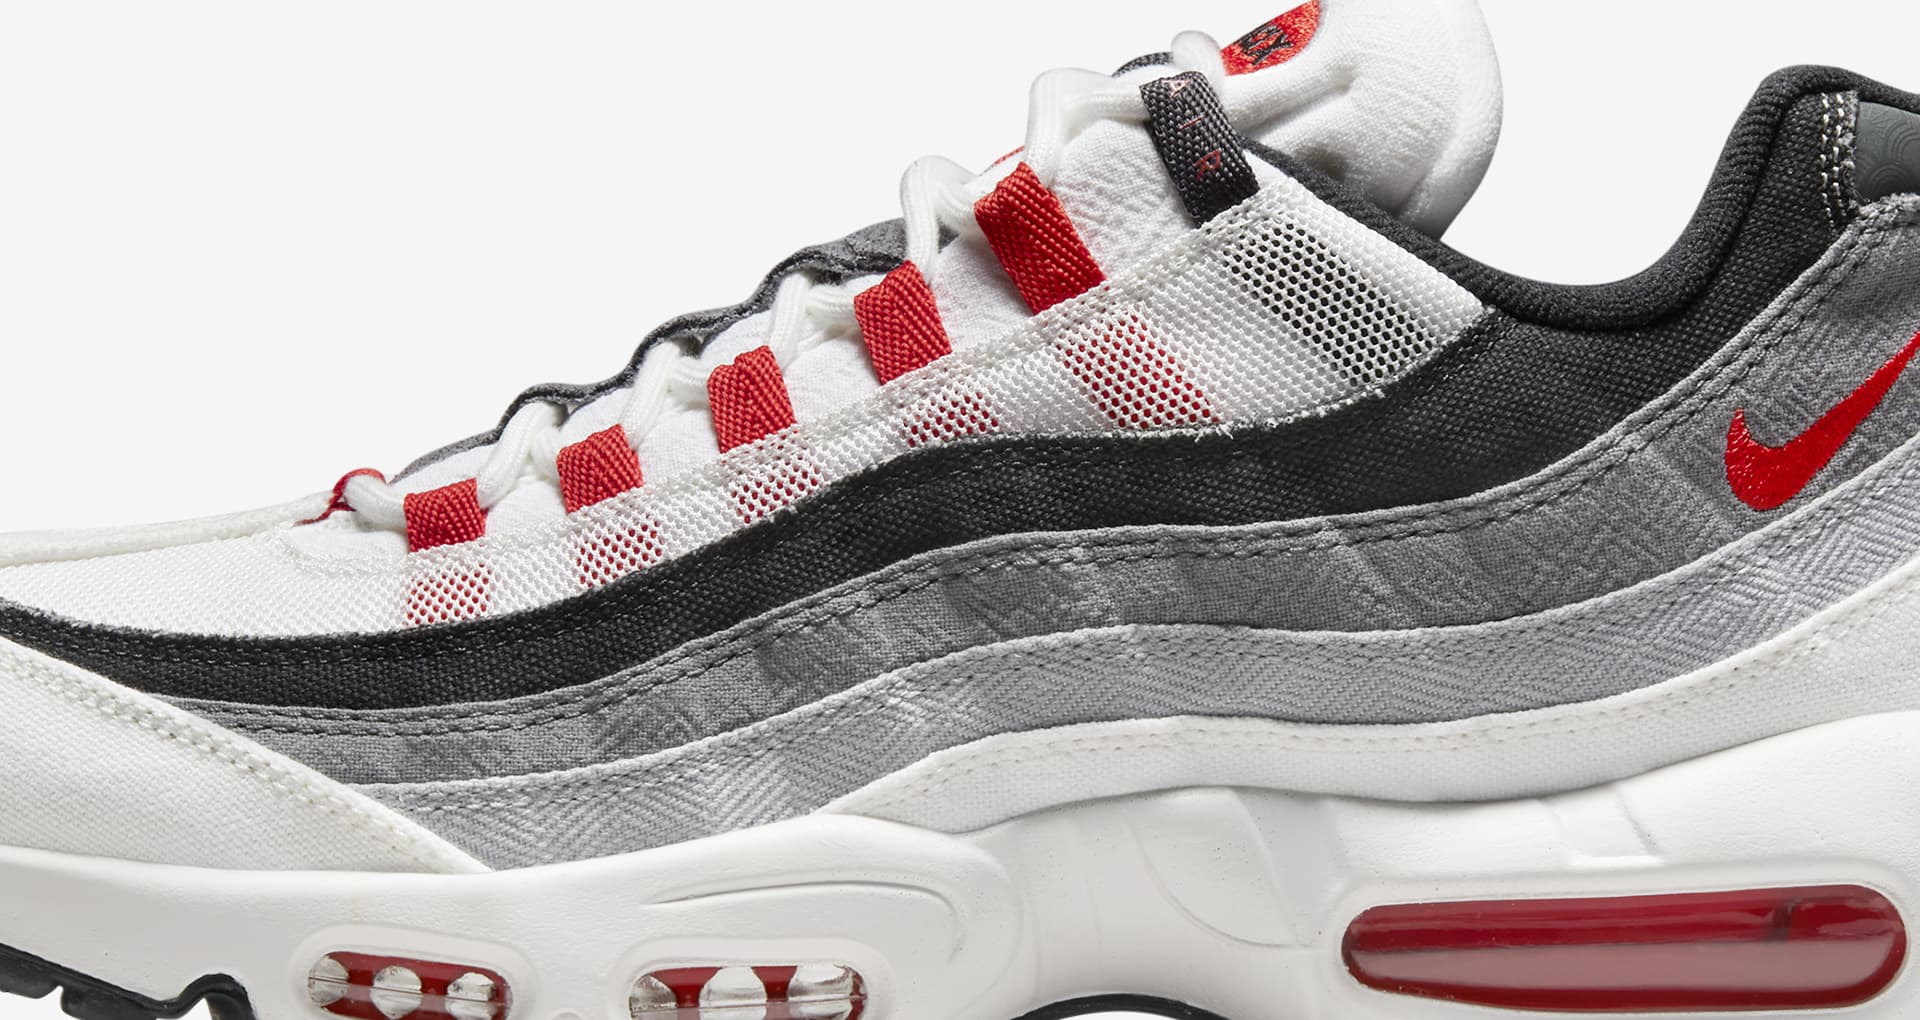 Air Max 95 Smoke Grey Release Date Nike Snkrs Be